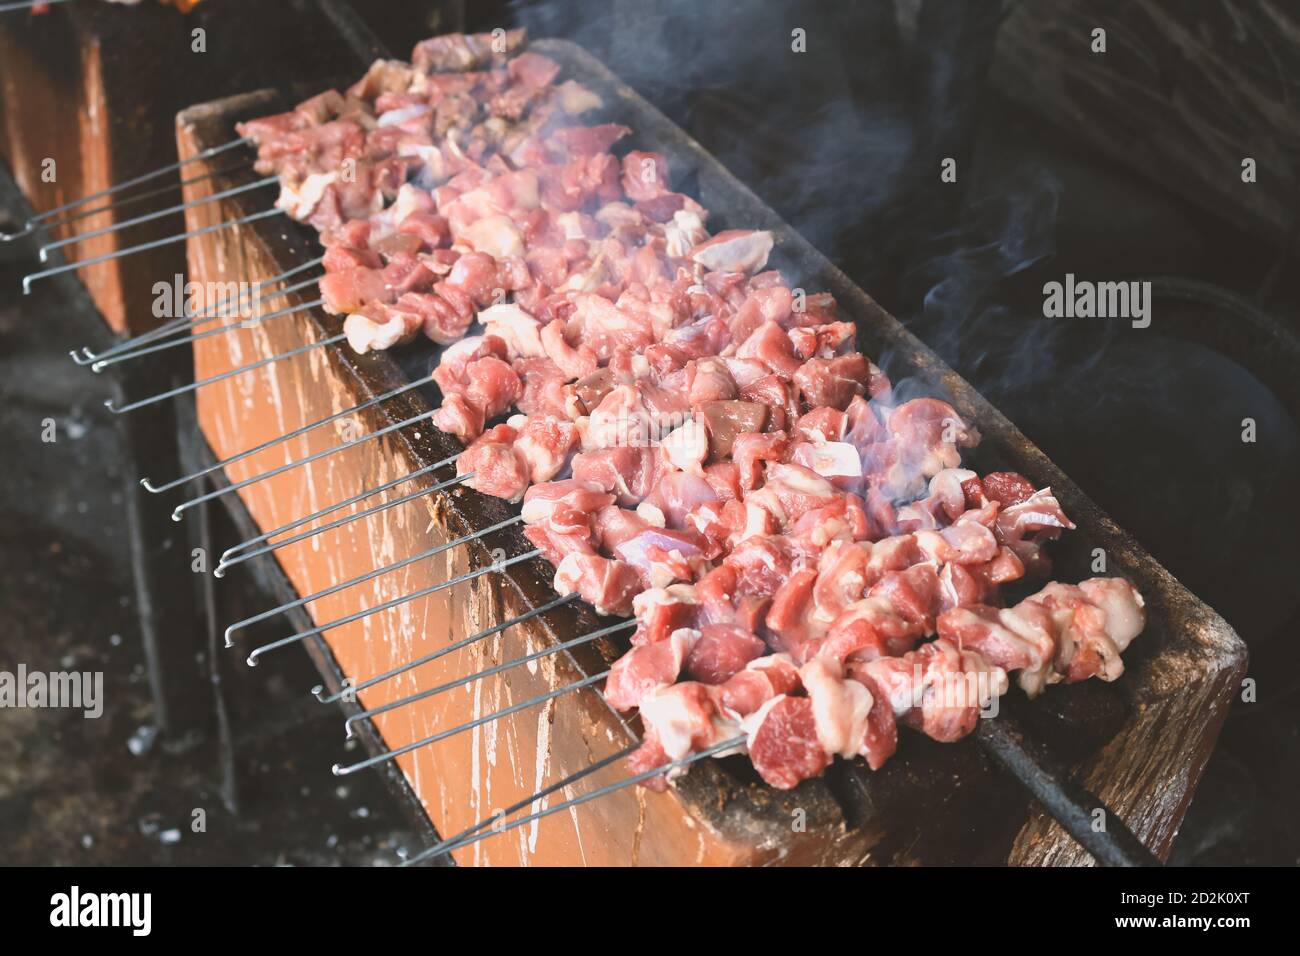 Sate Klatak grilling on charcoal grill. Sate klathak is a unique goat satay or mutton satay dish, originally from Yogyakarta, Indonesia. Stock Photo